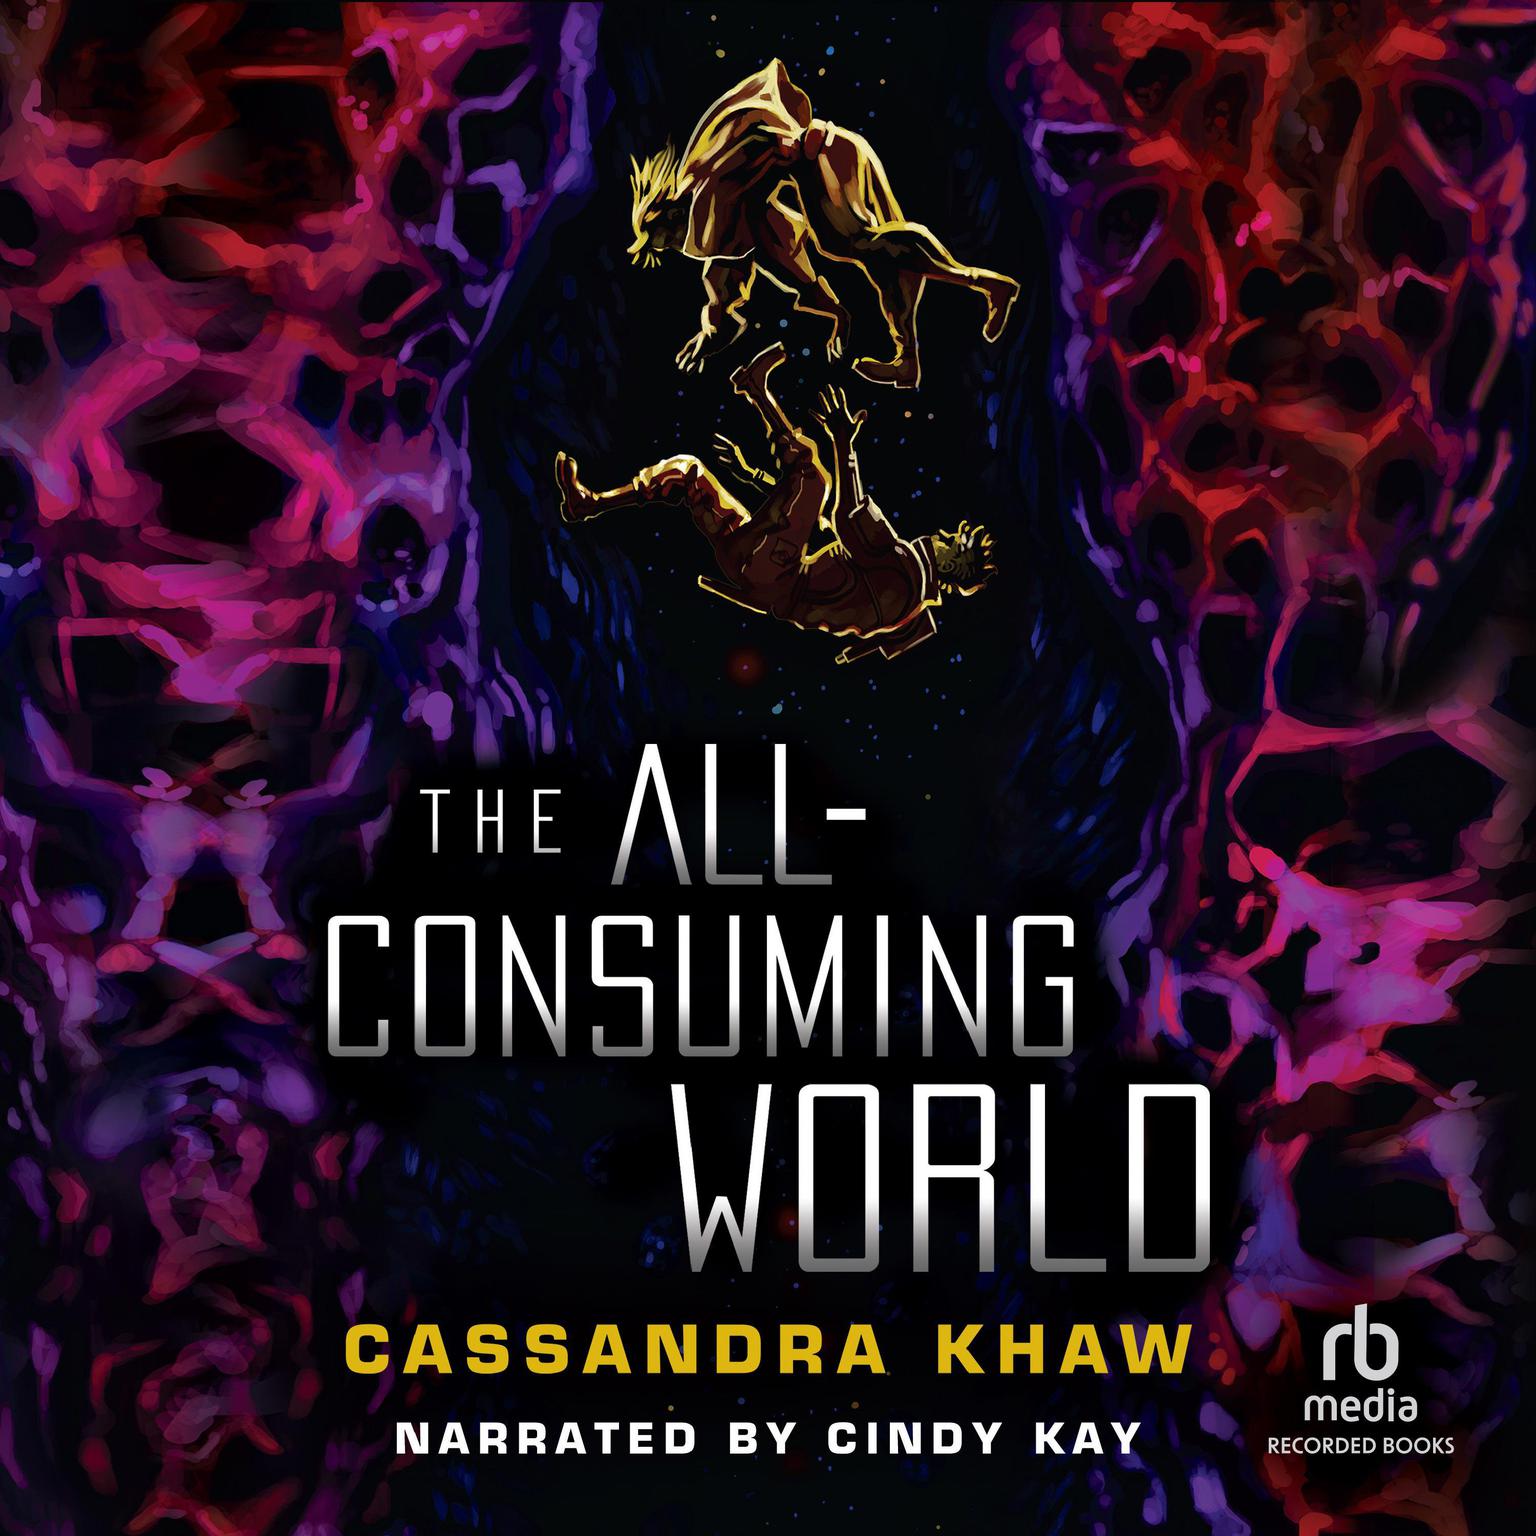 The All-Consuming World Audiobook, by Cassandra Khaw